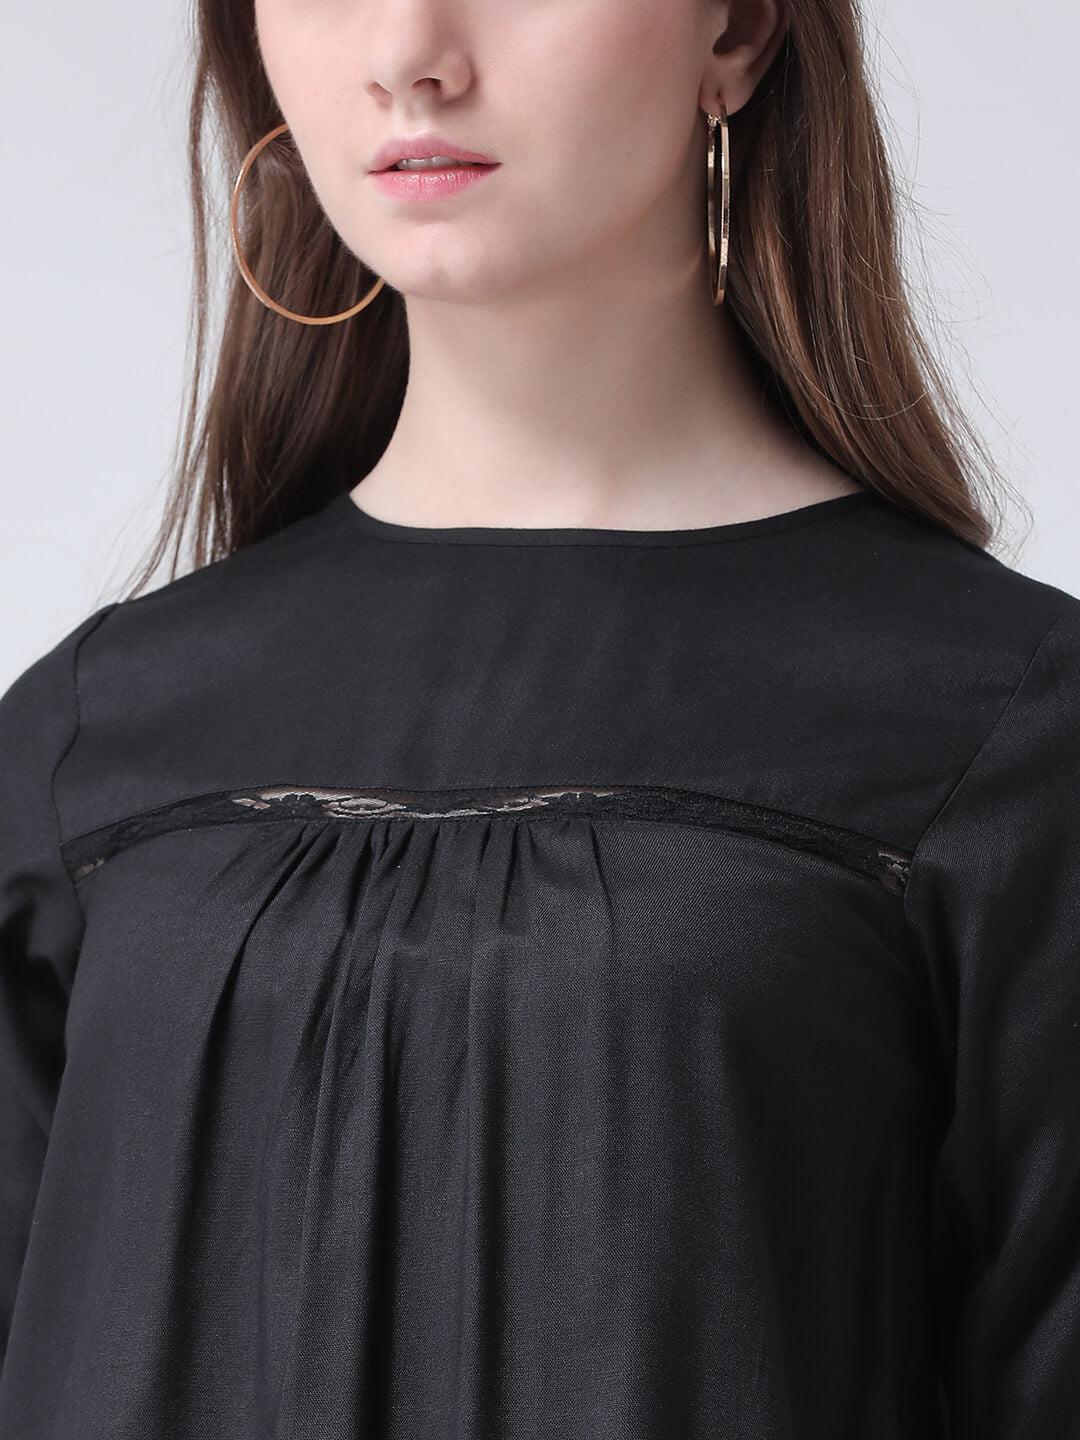 Women'S Black Rayon Blouse With Lace Insert Detail On The Yoke And Gathers Detail